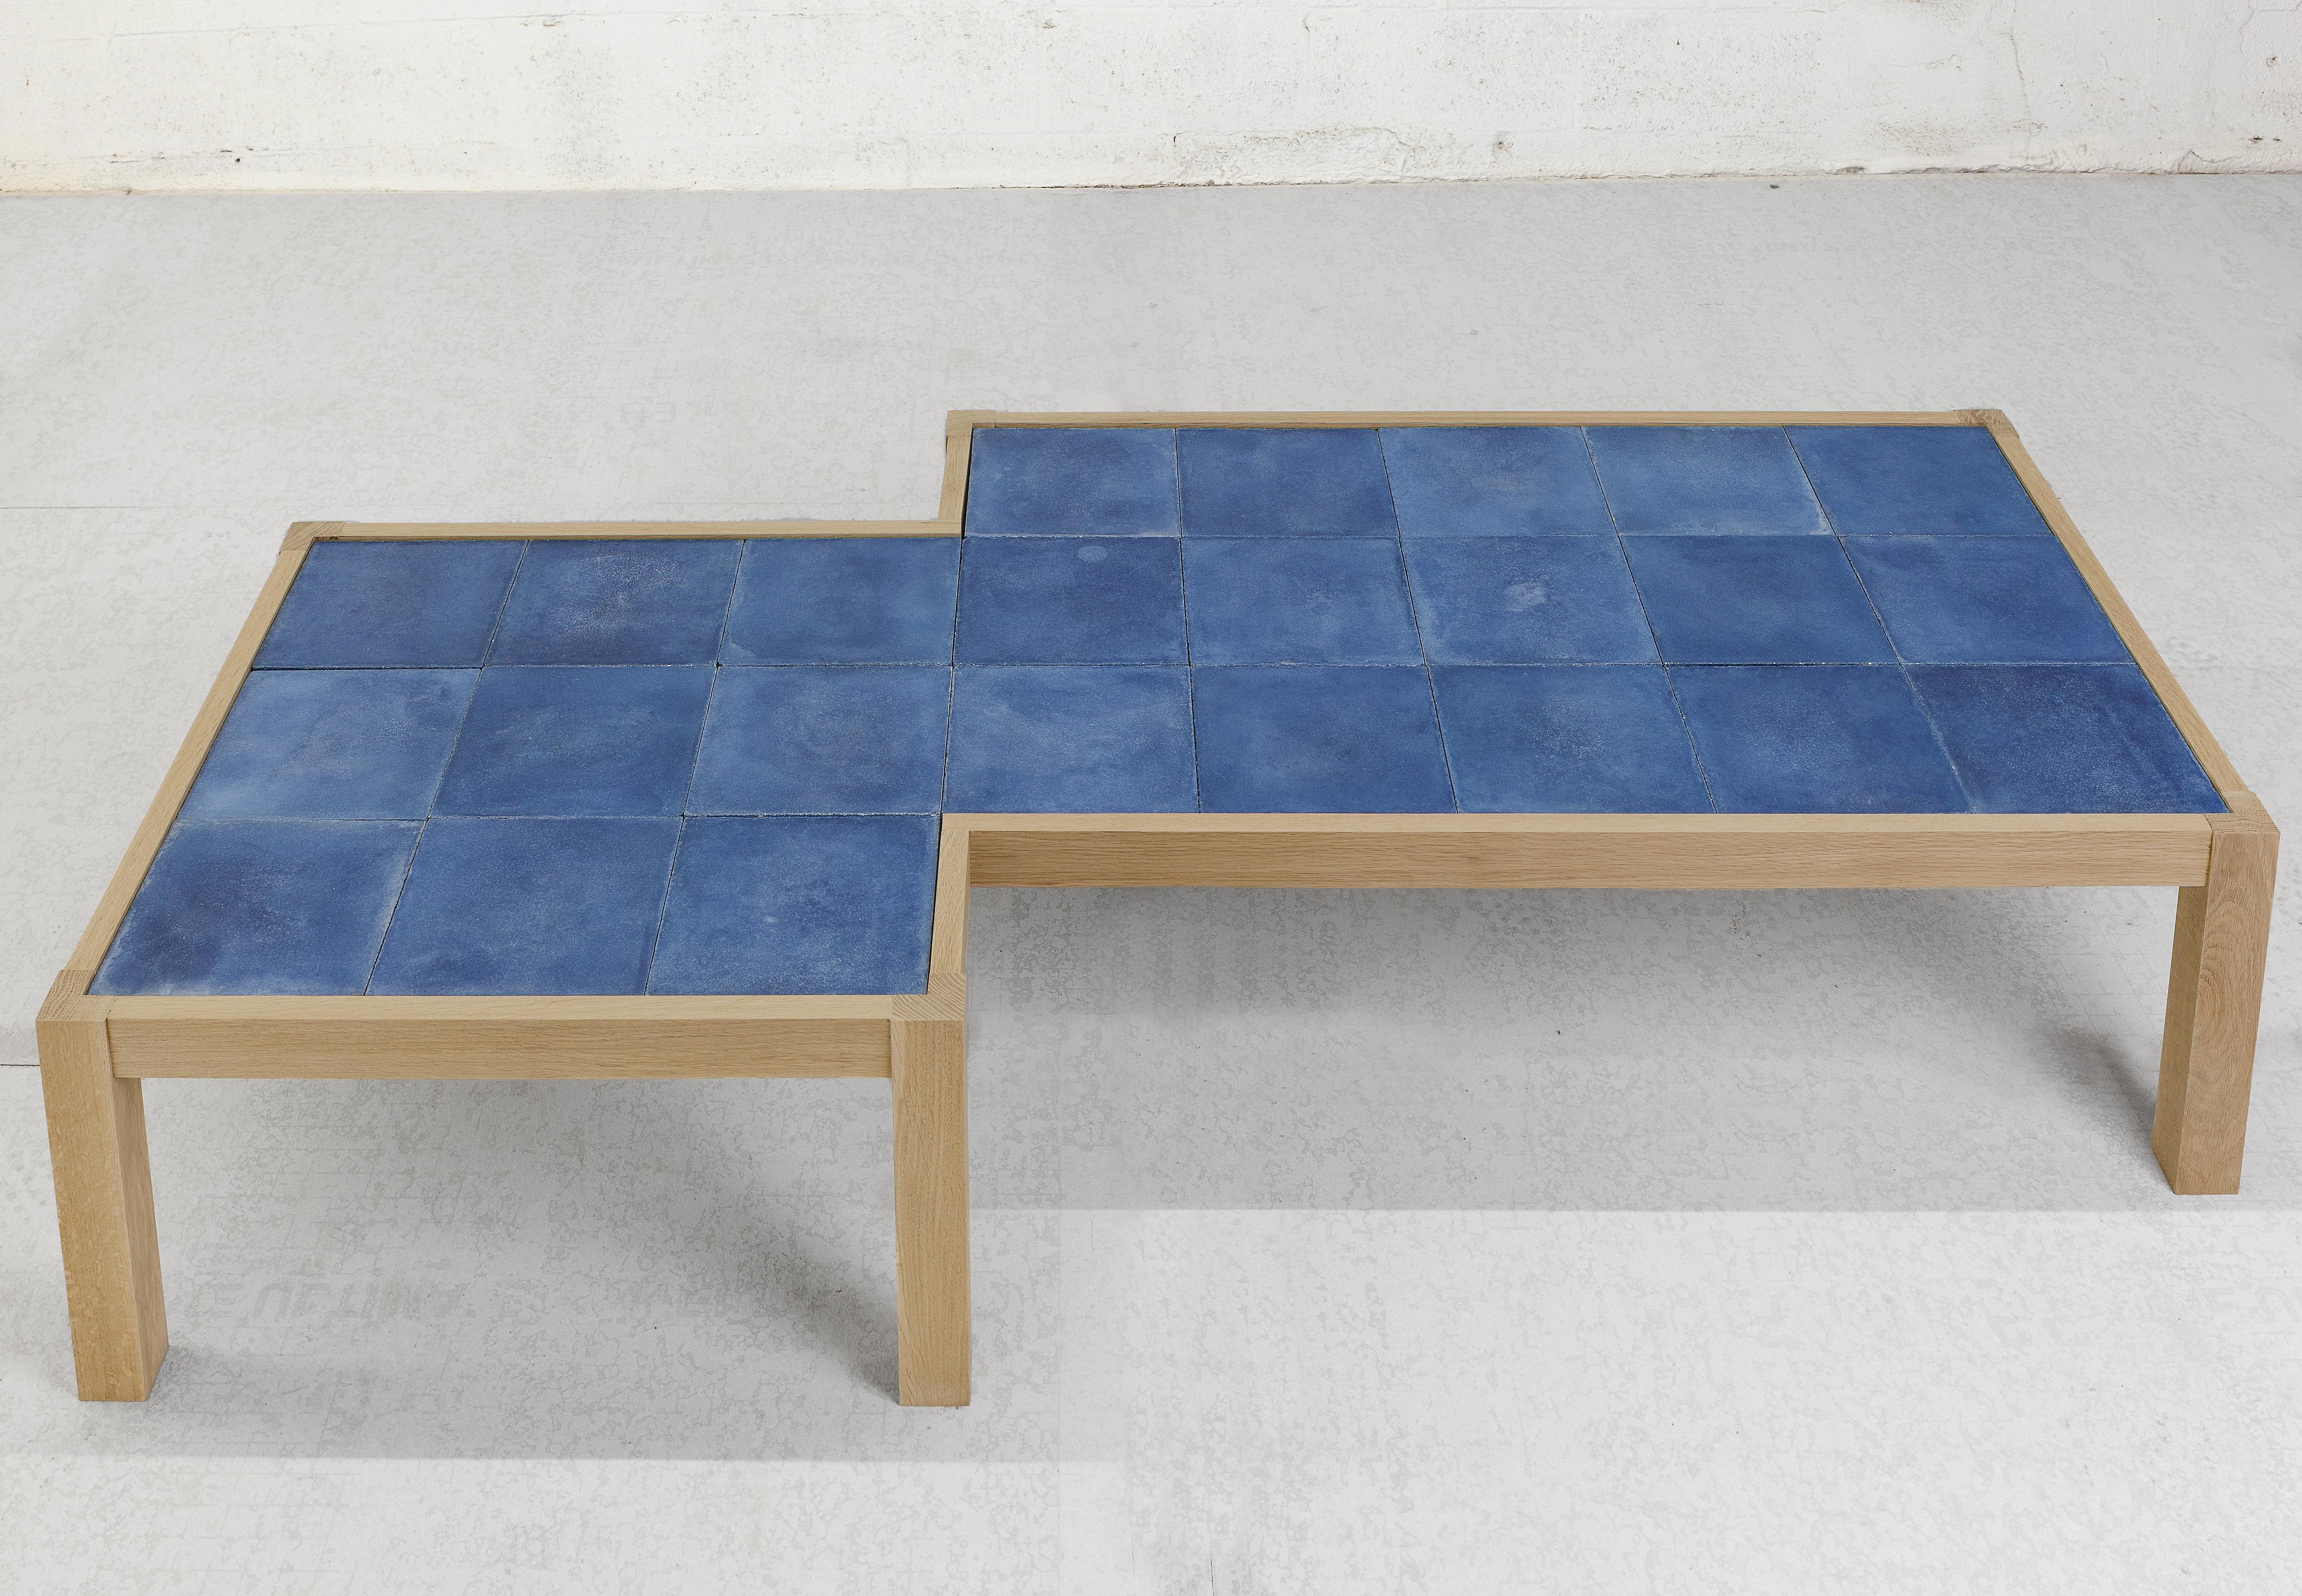 Warm Contemporary Low Table in Natural Oak and Blue Tile by Vivian Carbonell In New Condition For Sale In Miami, FL